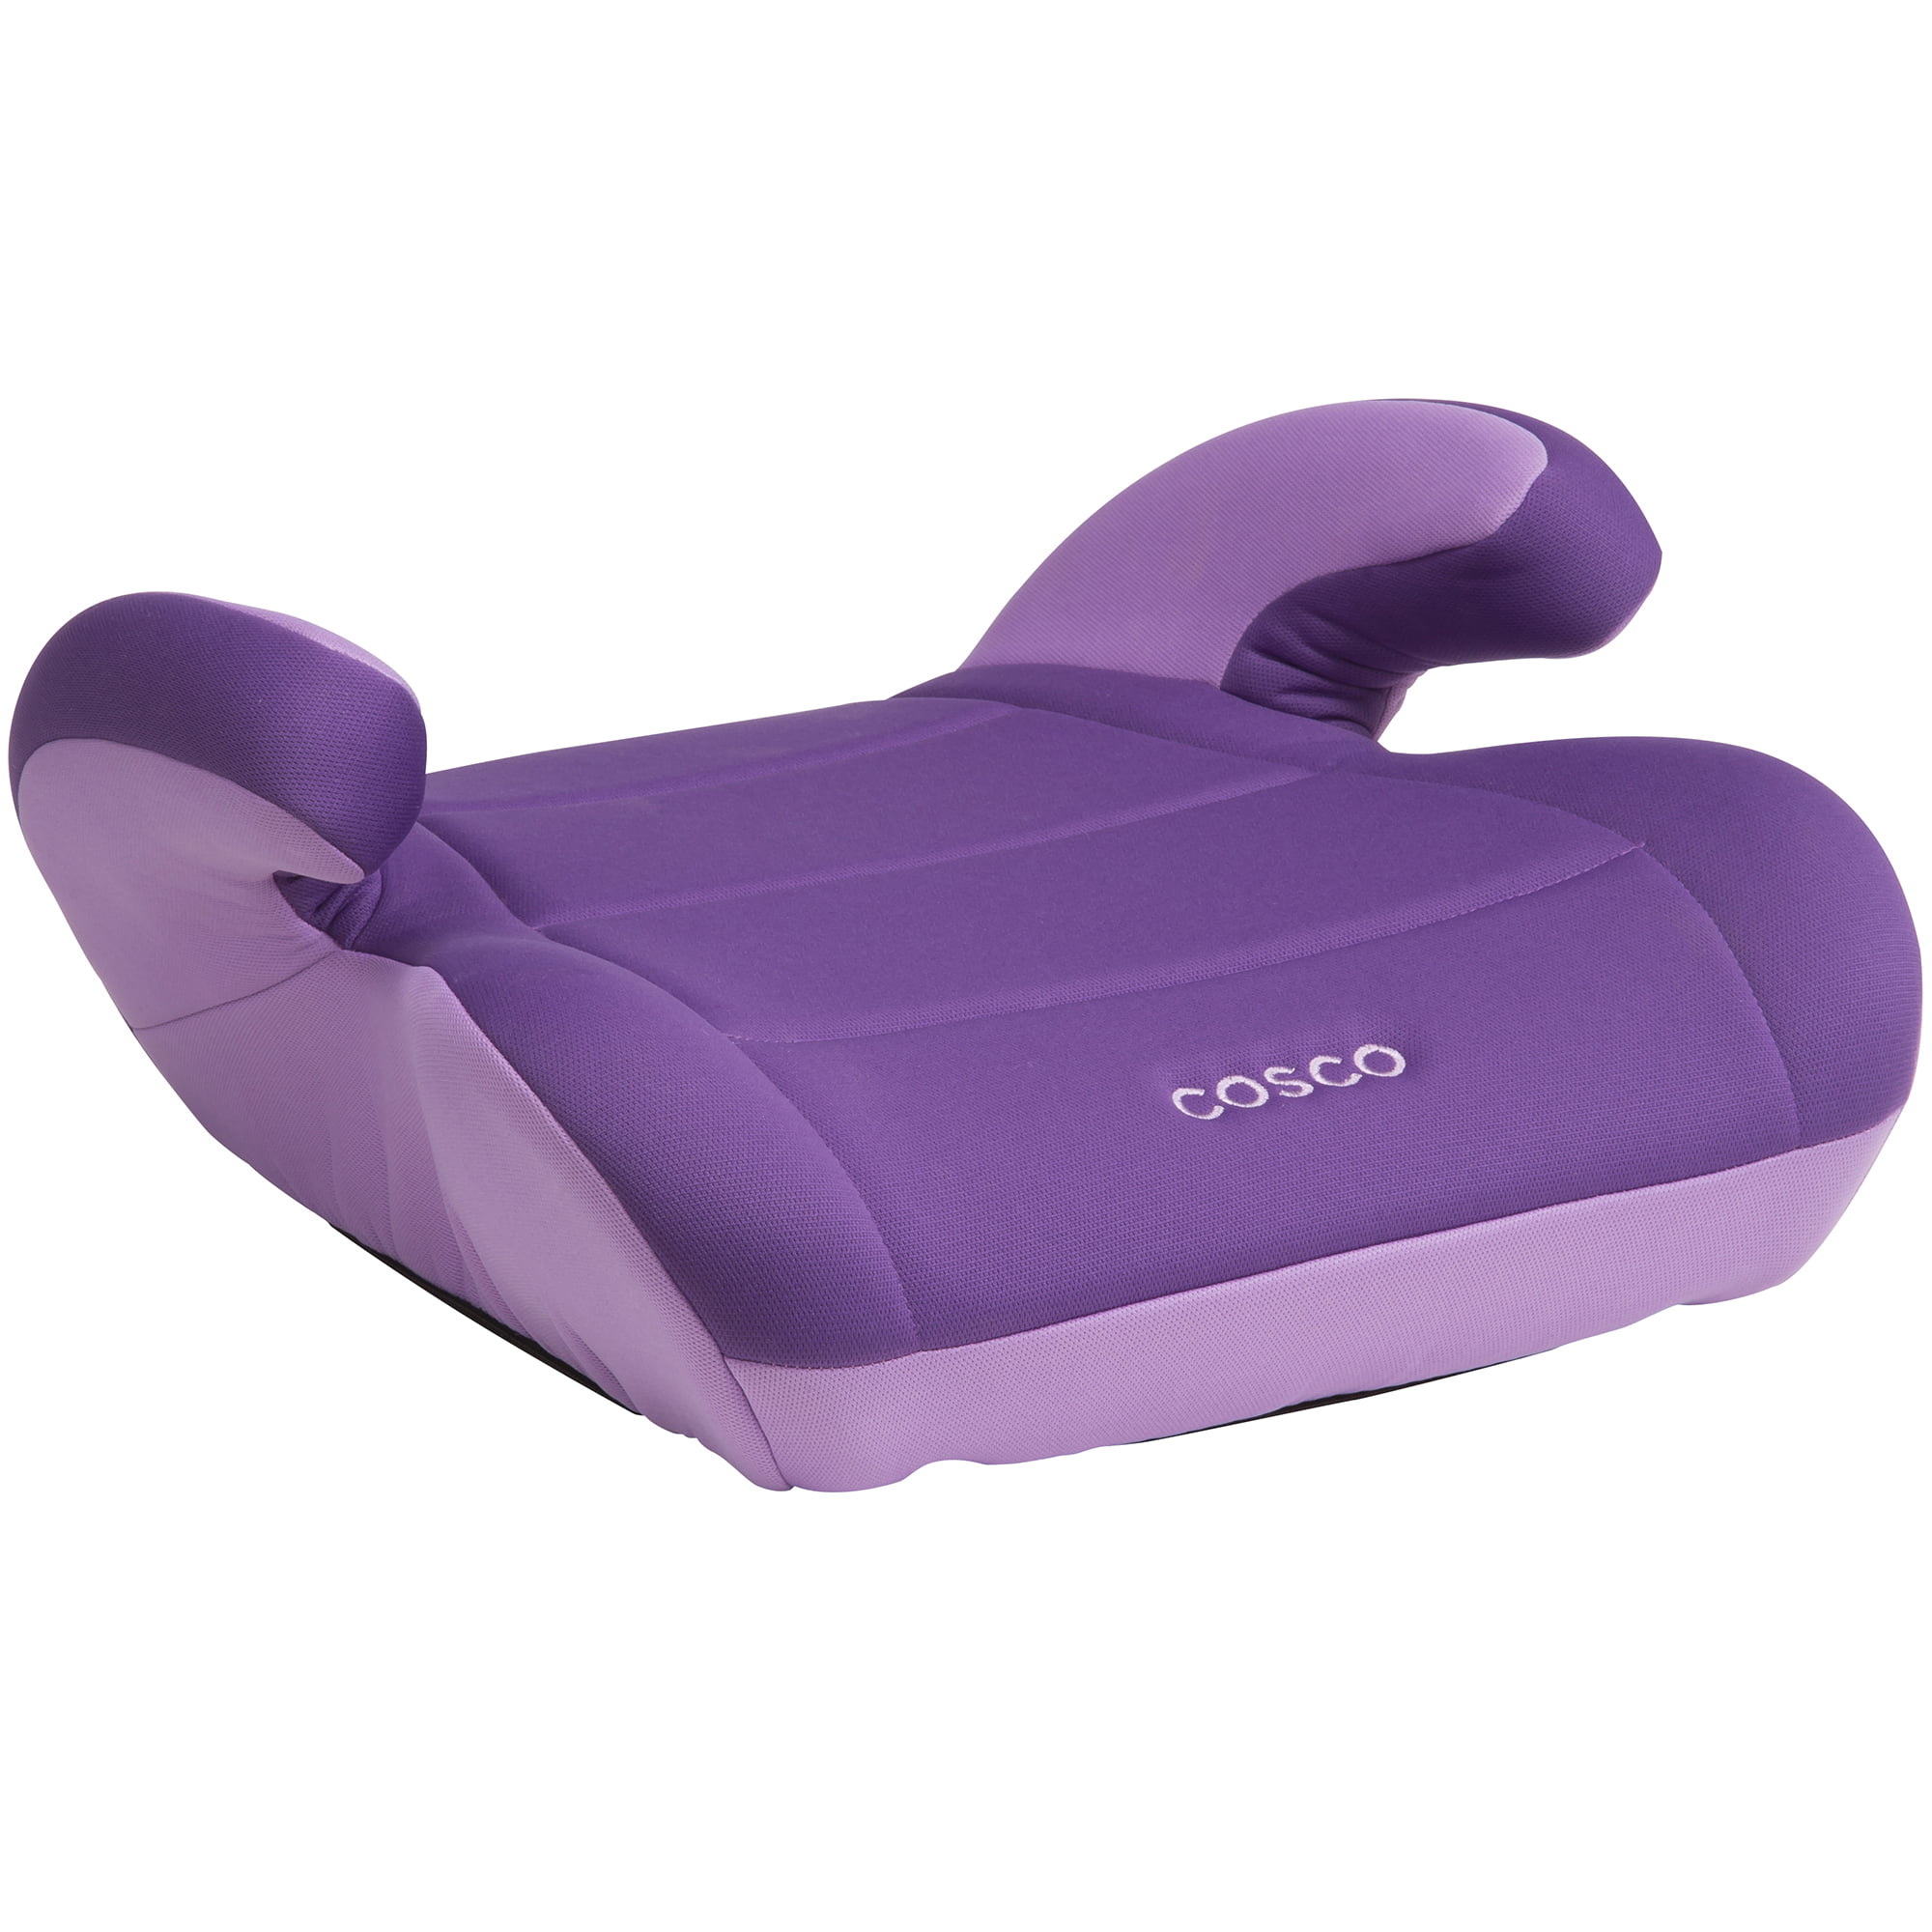 Photo 1 of **NEW** Cosco Topside Child Safe Belt Positioned Backless Booster Car Seat, Purple Grape